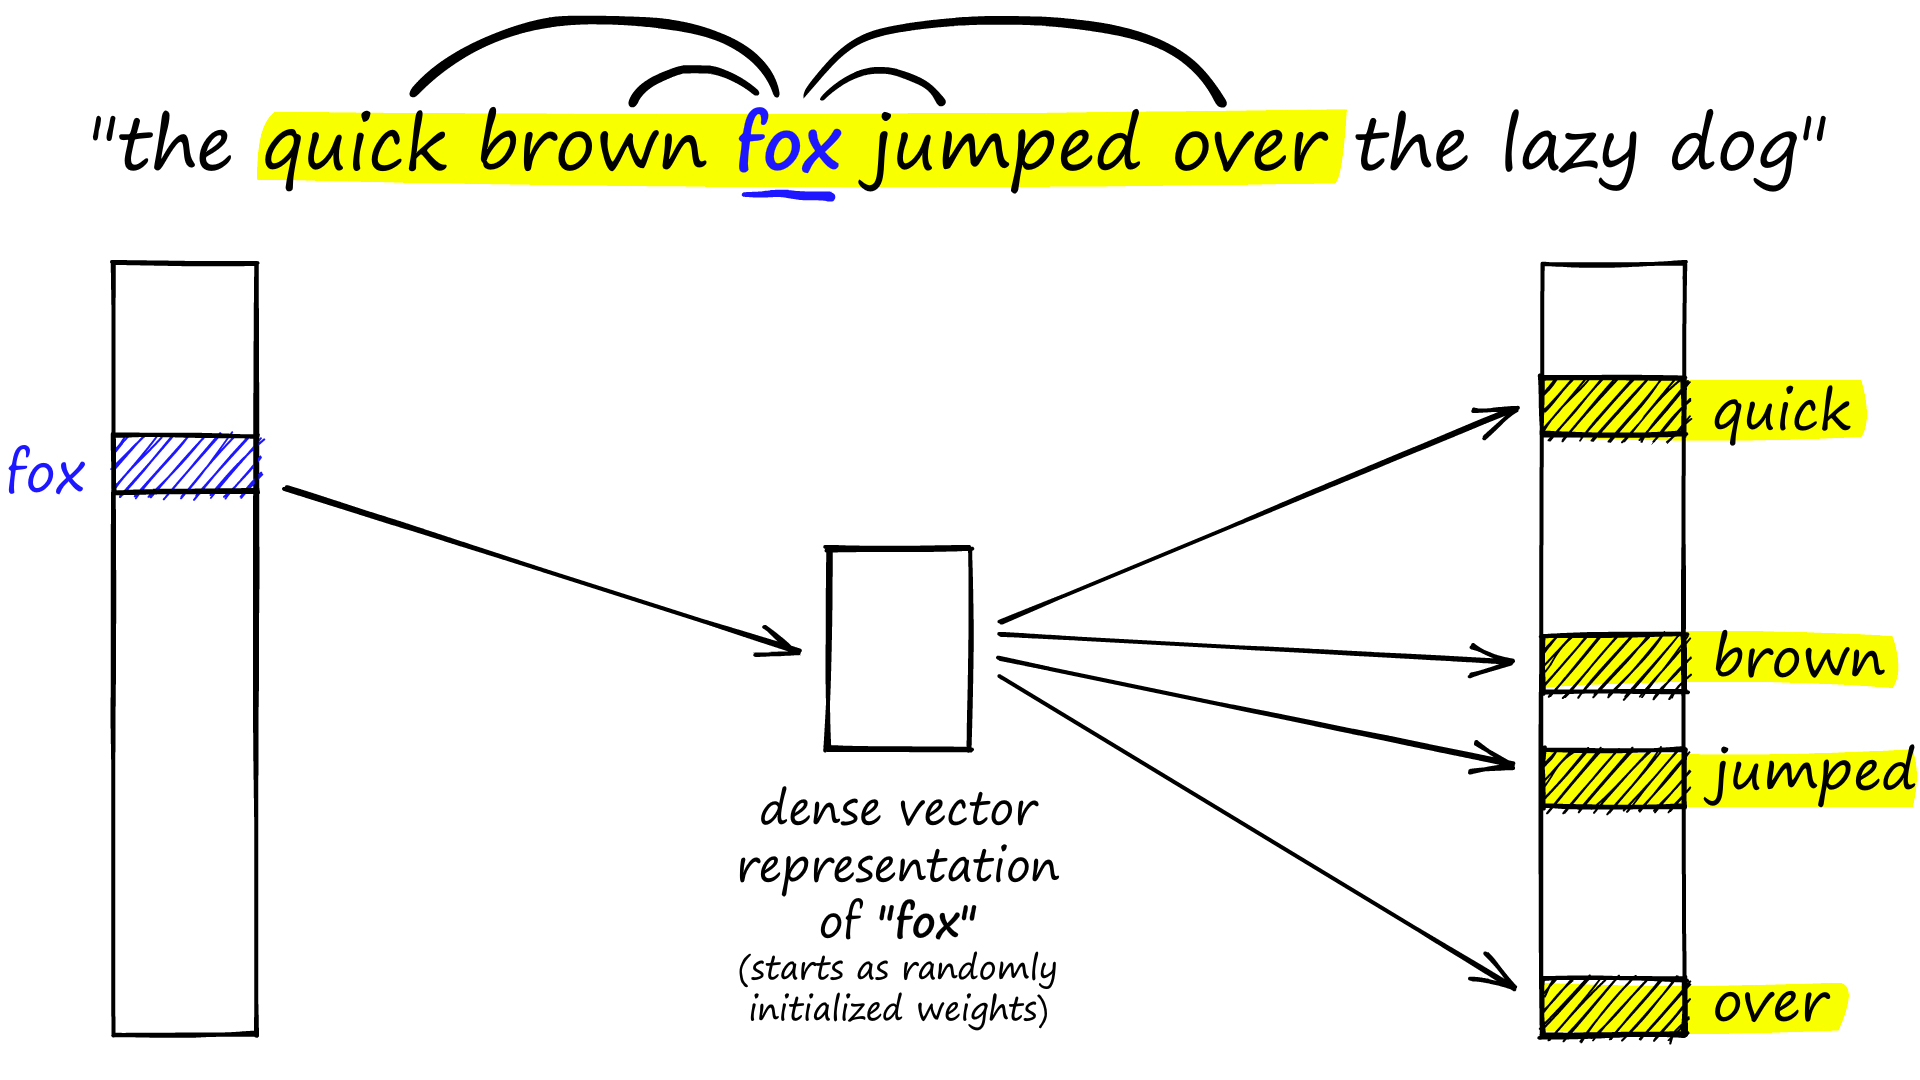 The skip-gram approach to building dense vectors embeddings in word2vec.